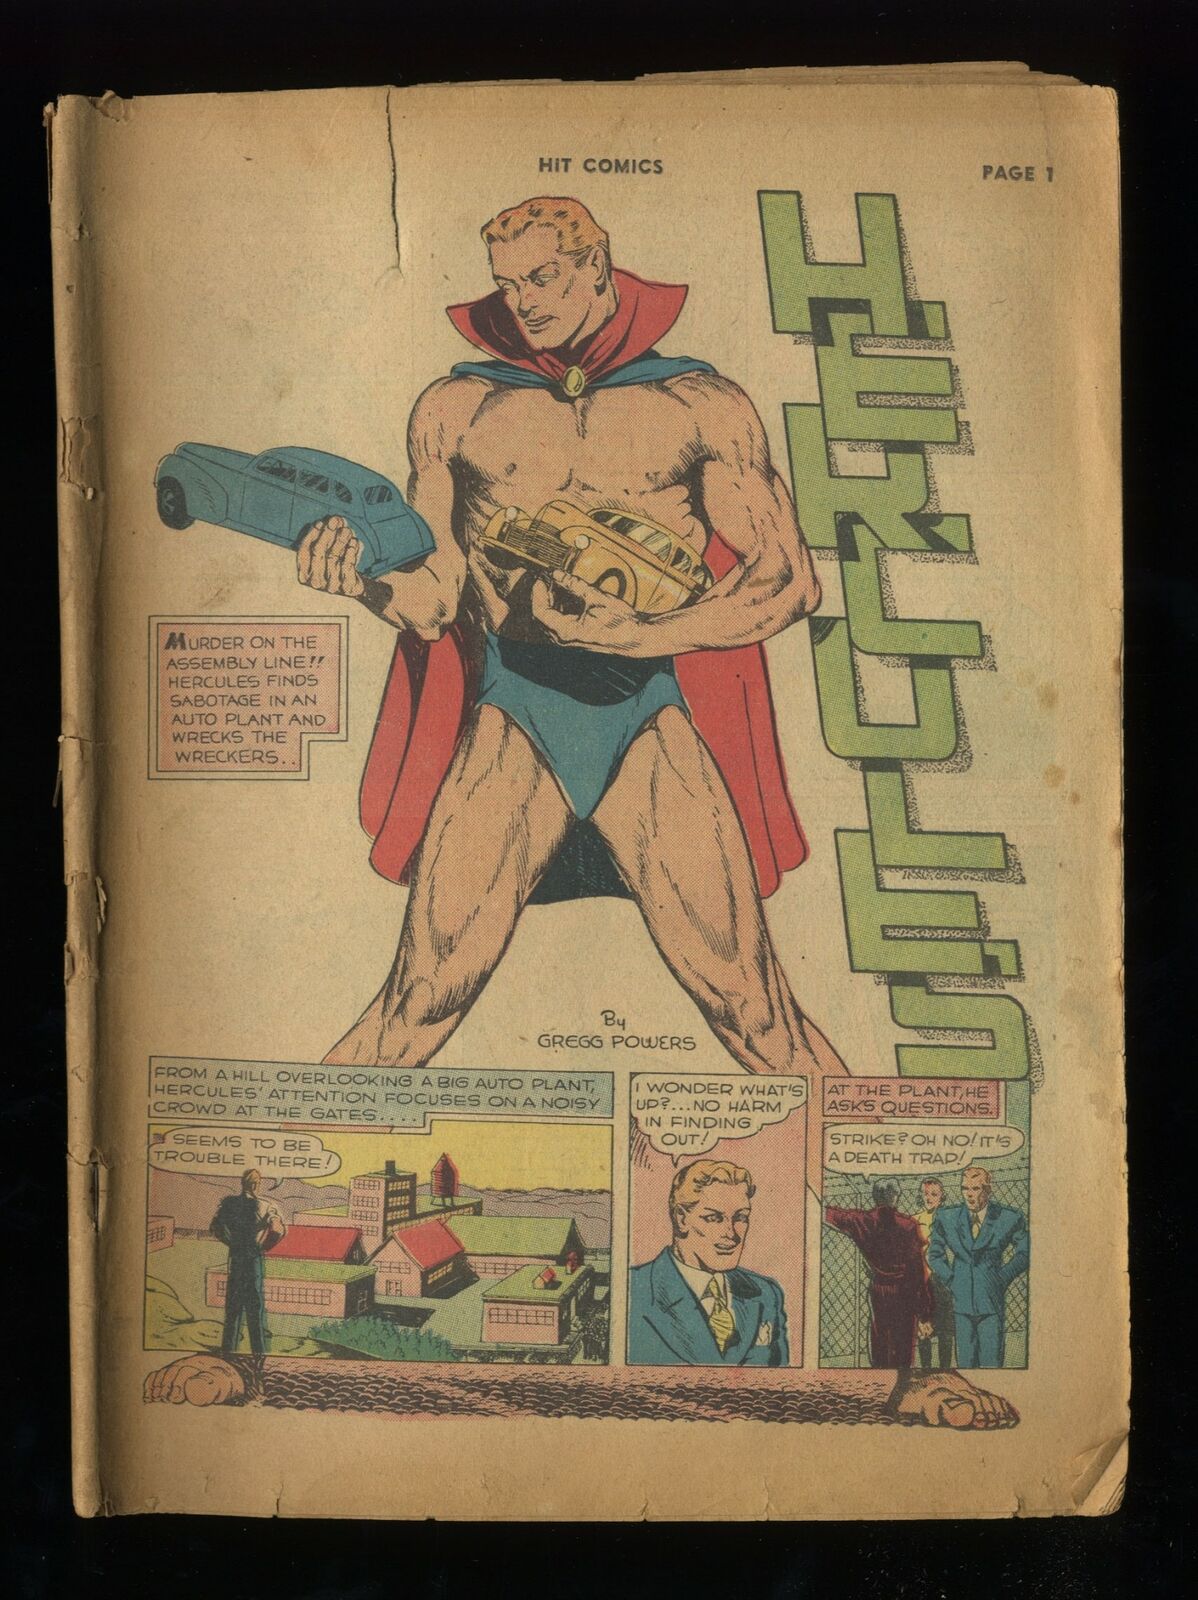 Hit Comics #5 Coverless Incomplete Missing Center Fold 3-D Zone 1940